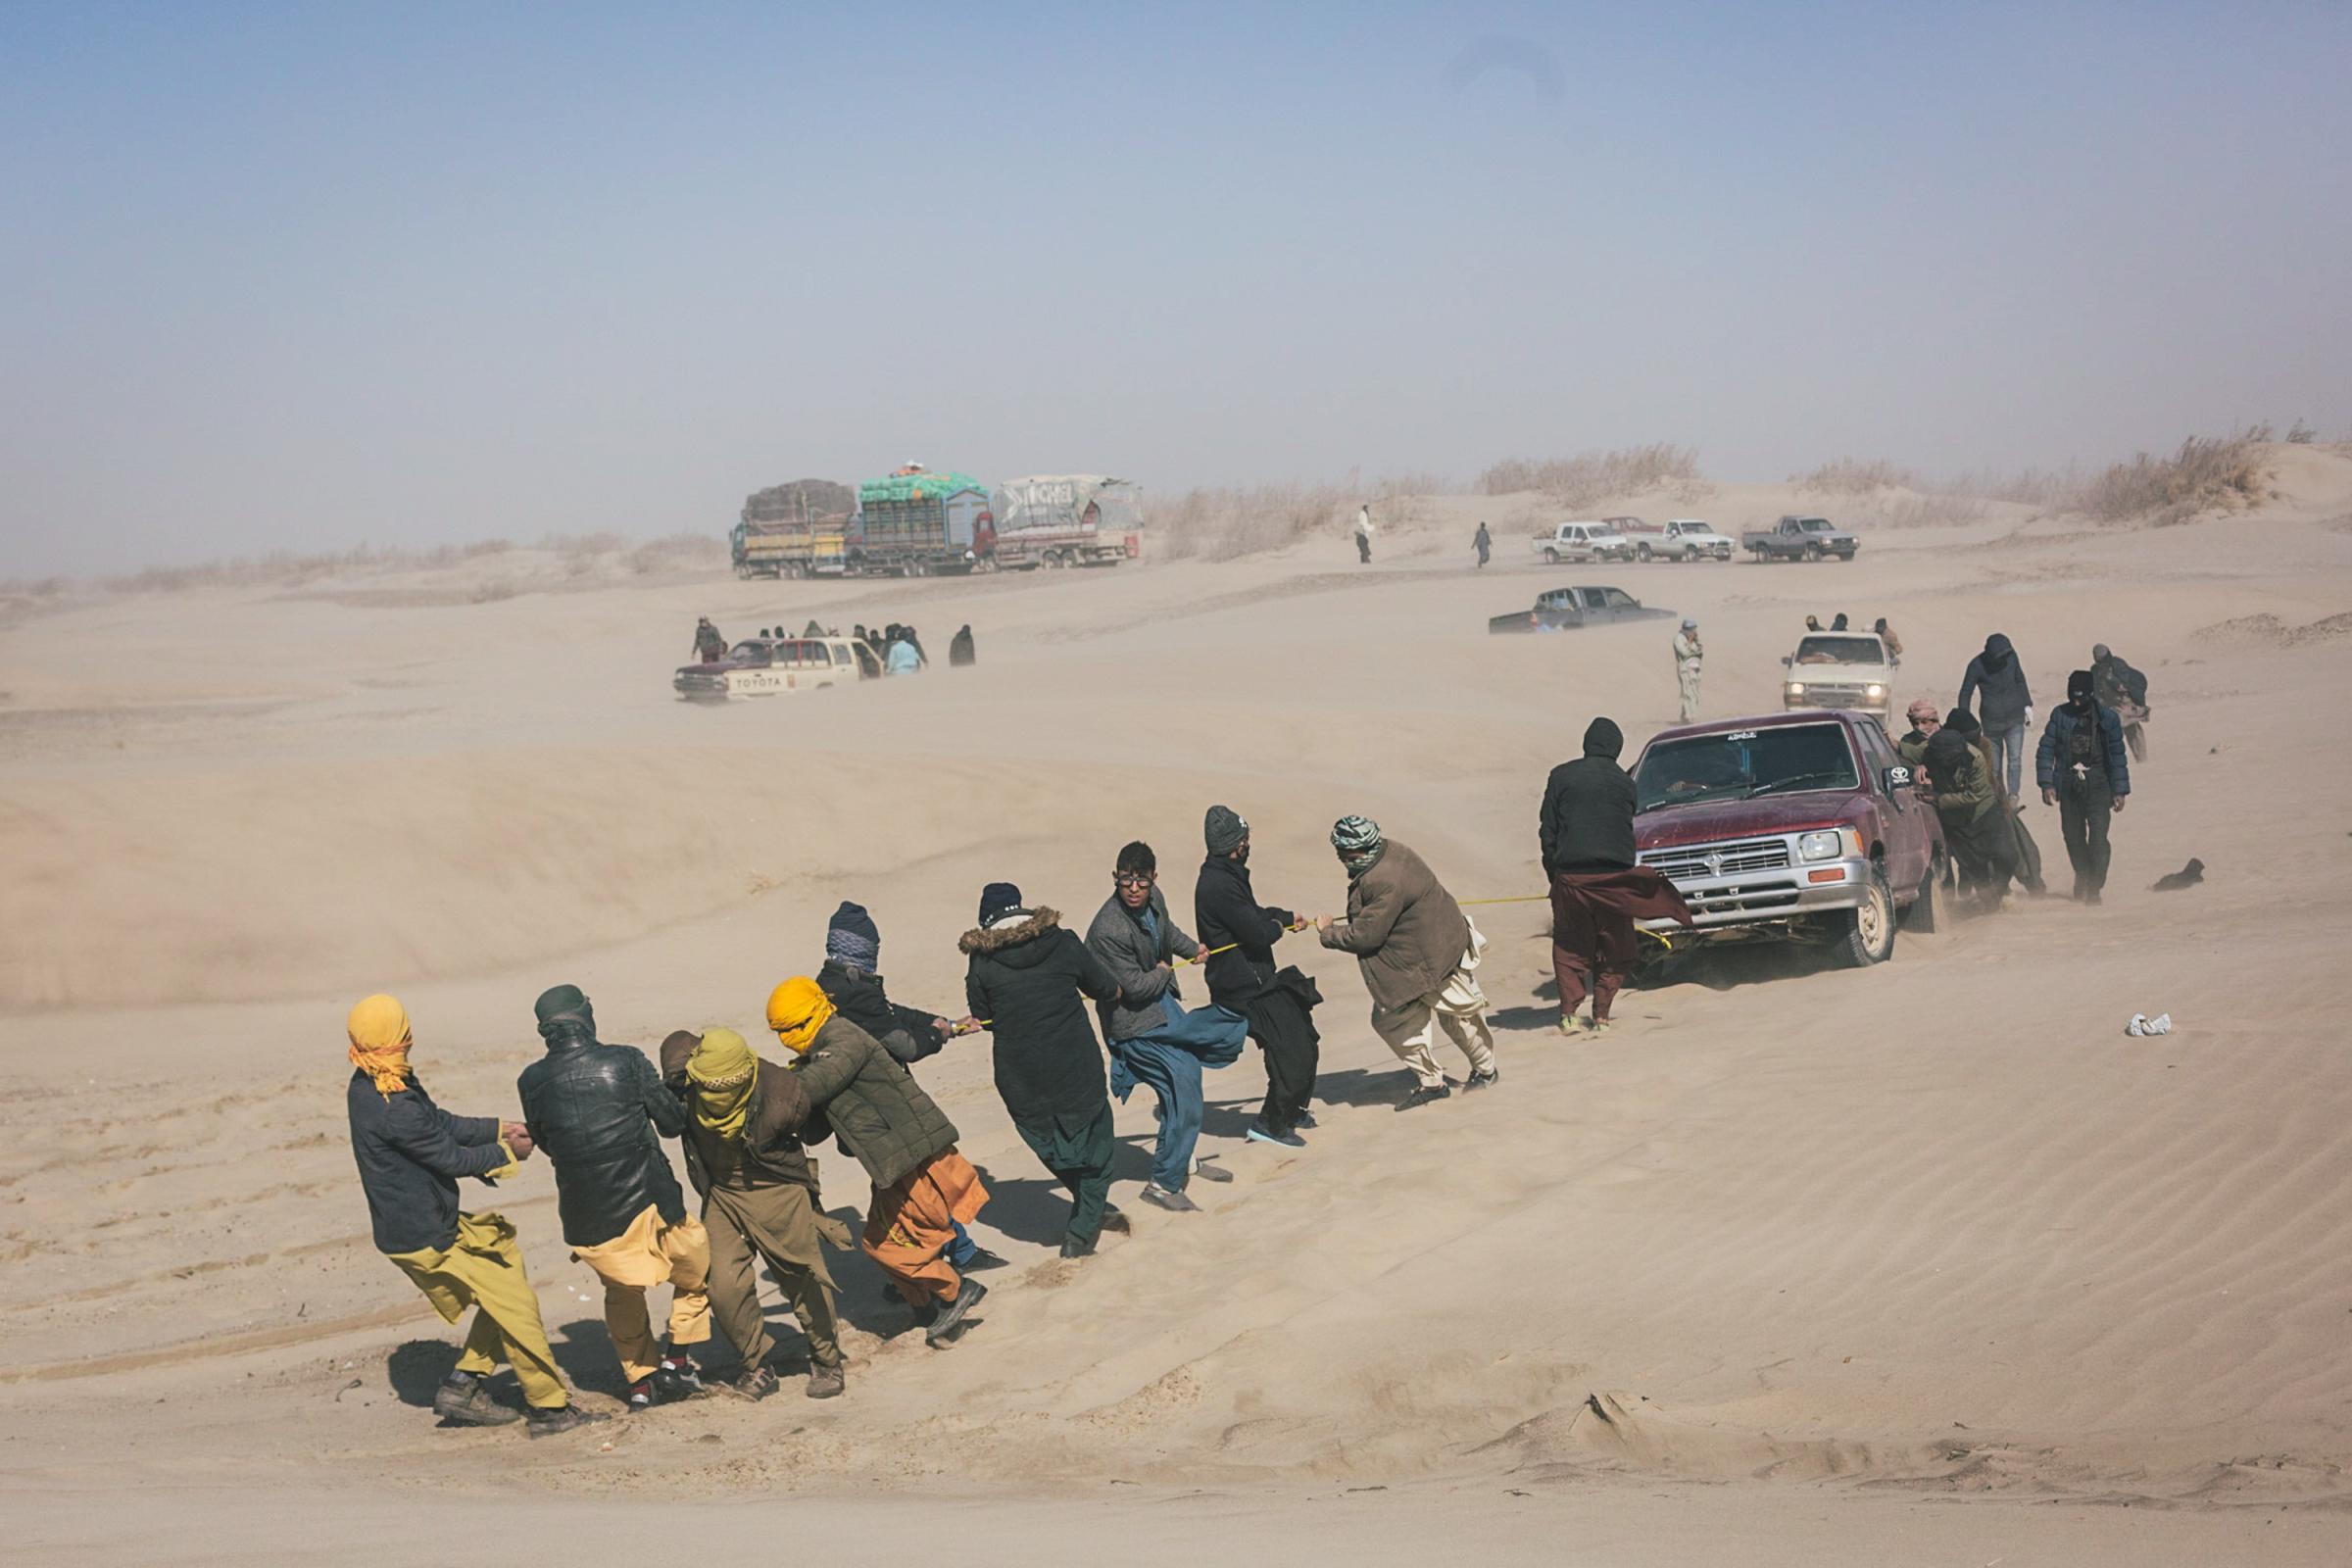 Afghan refugees pull pick-ups out of the desert sand.